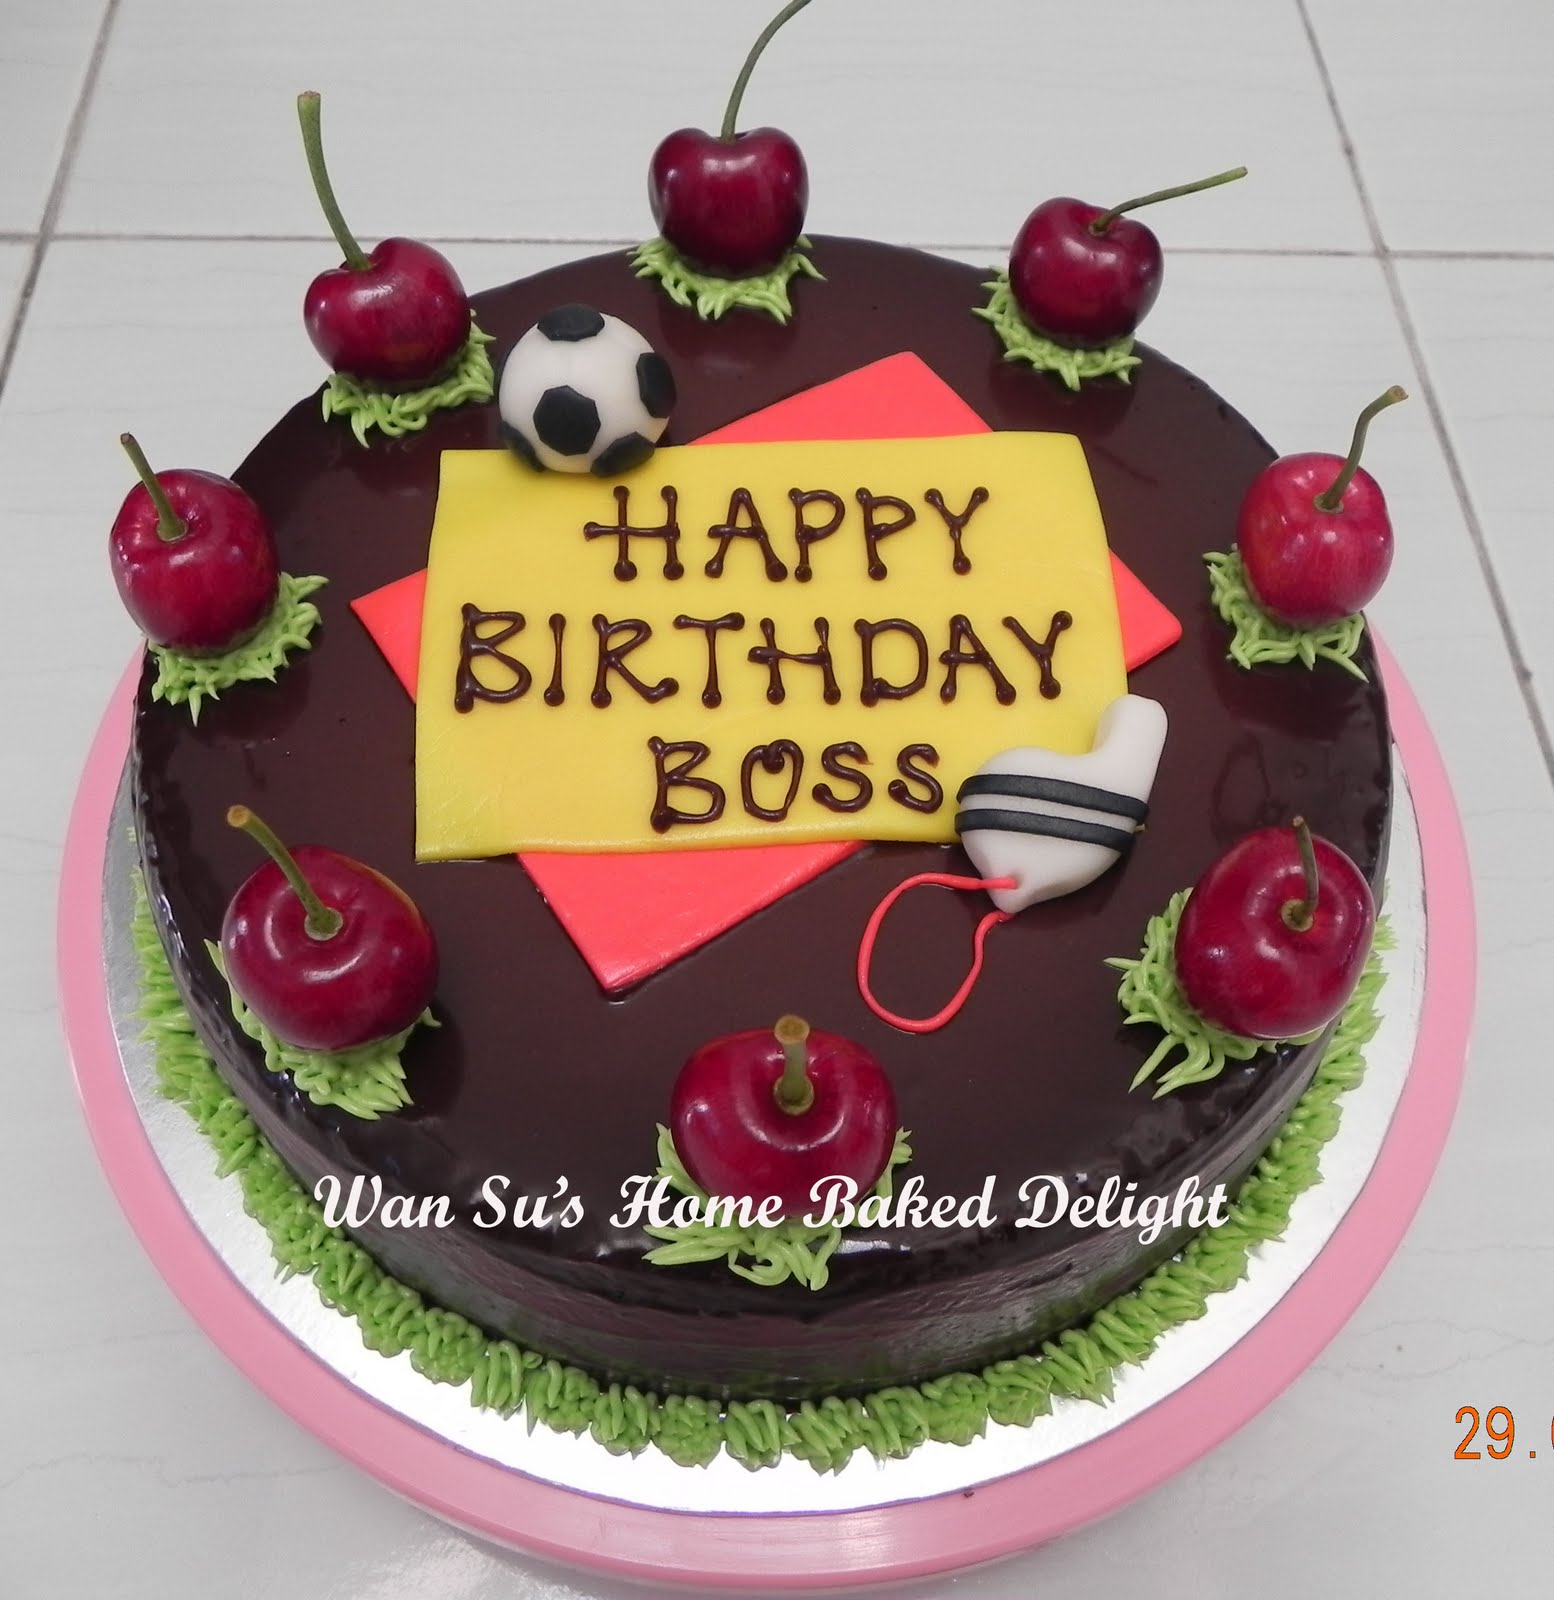 cake boss cakes Posted by Wan Suhaila at 11:41 PM